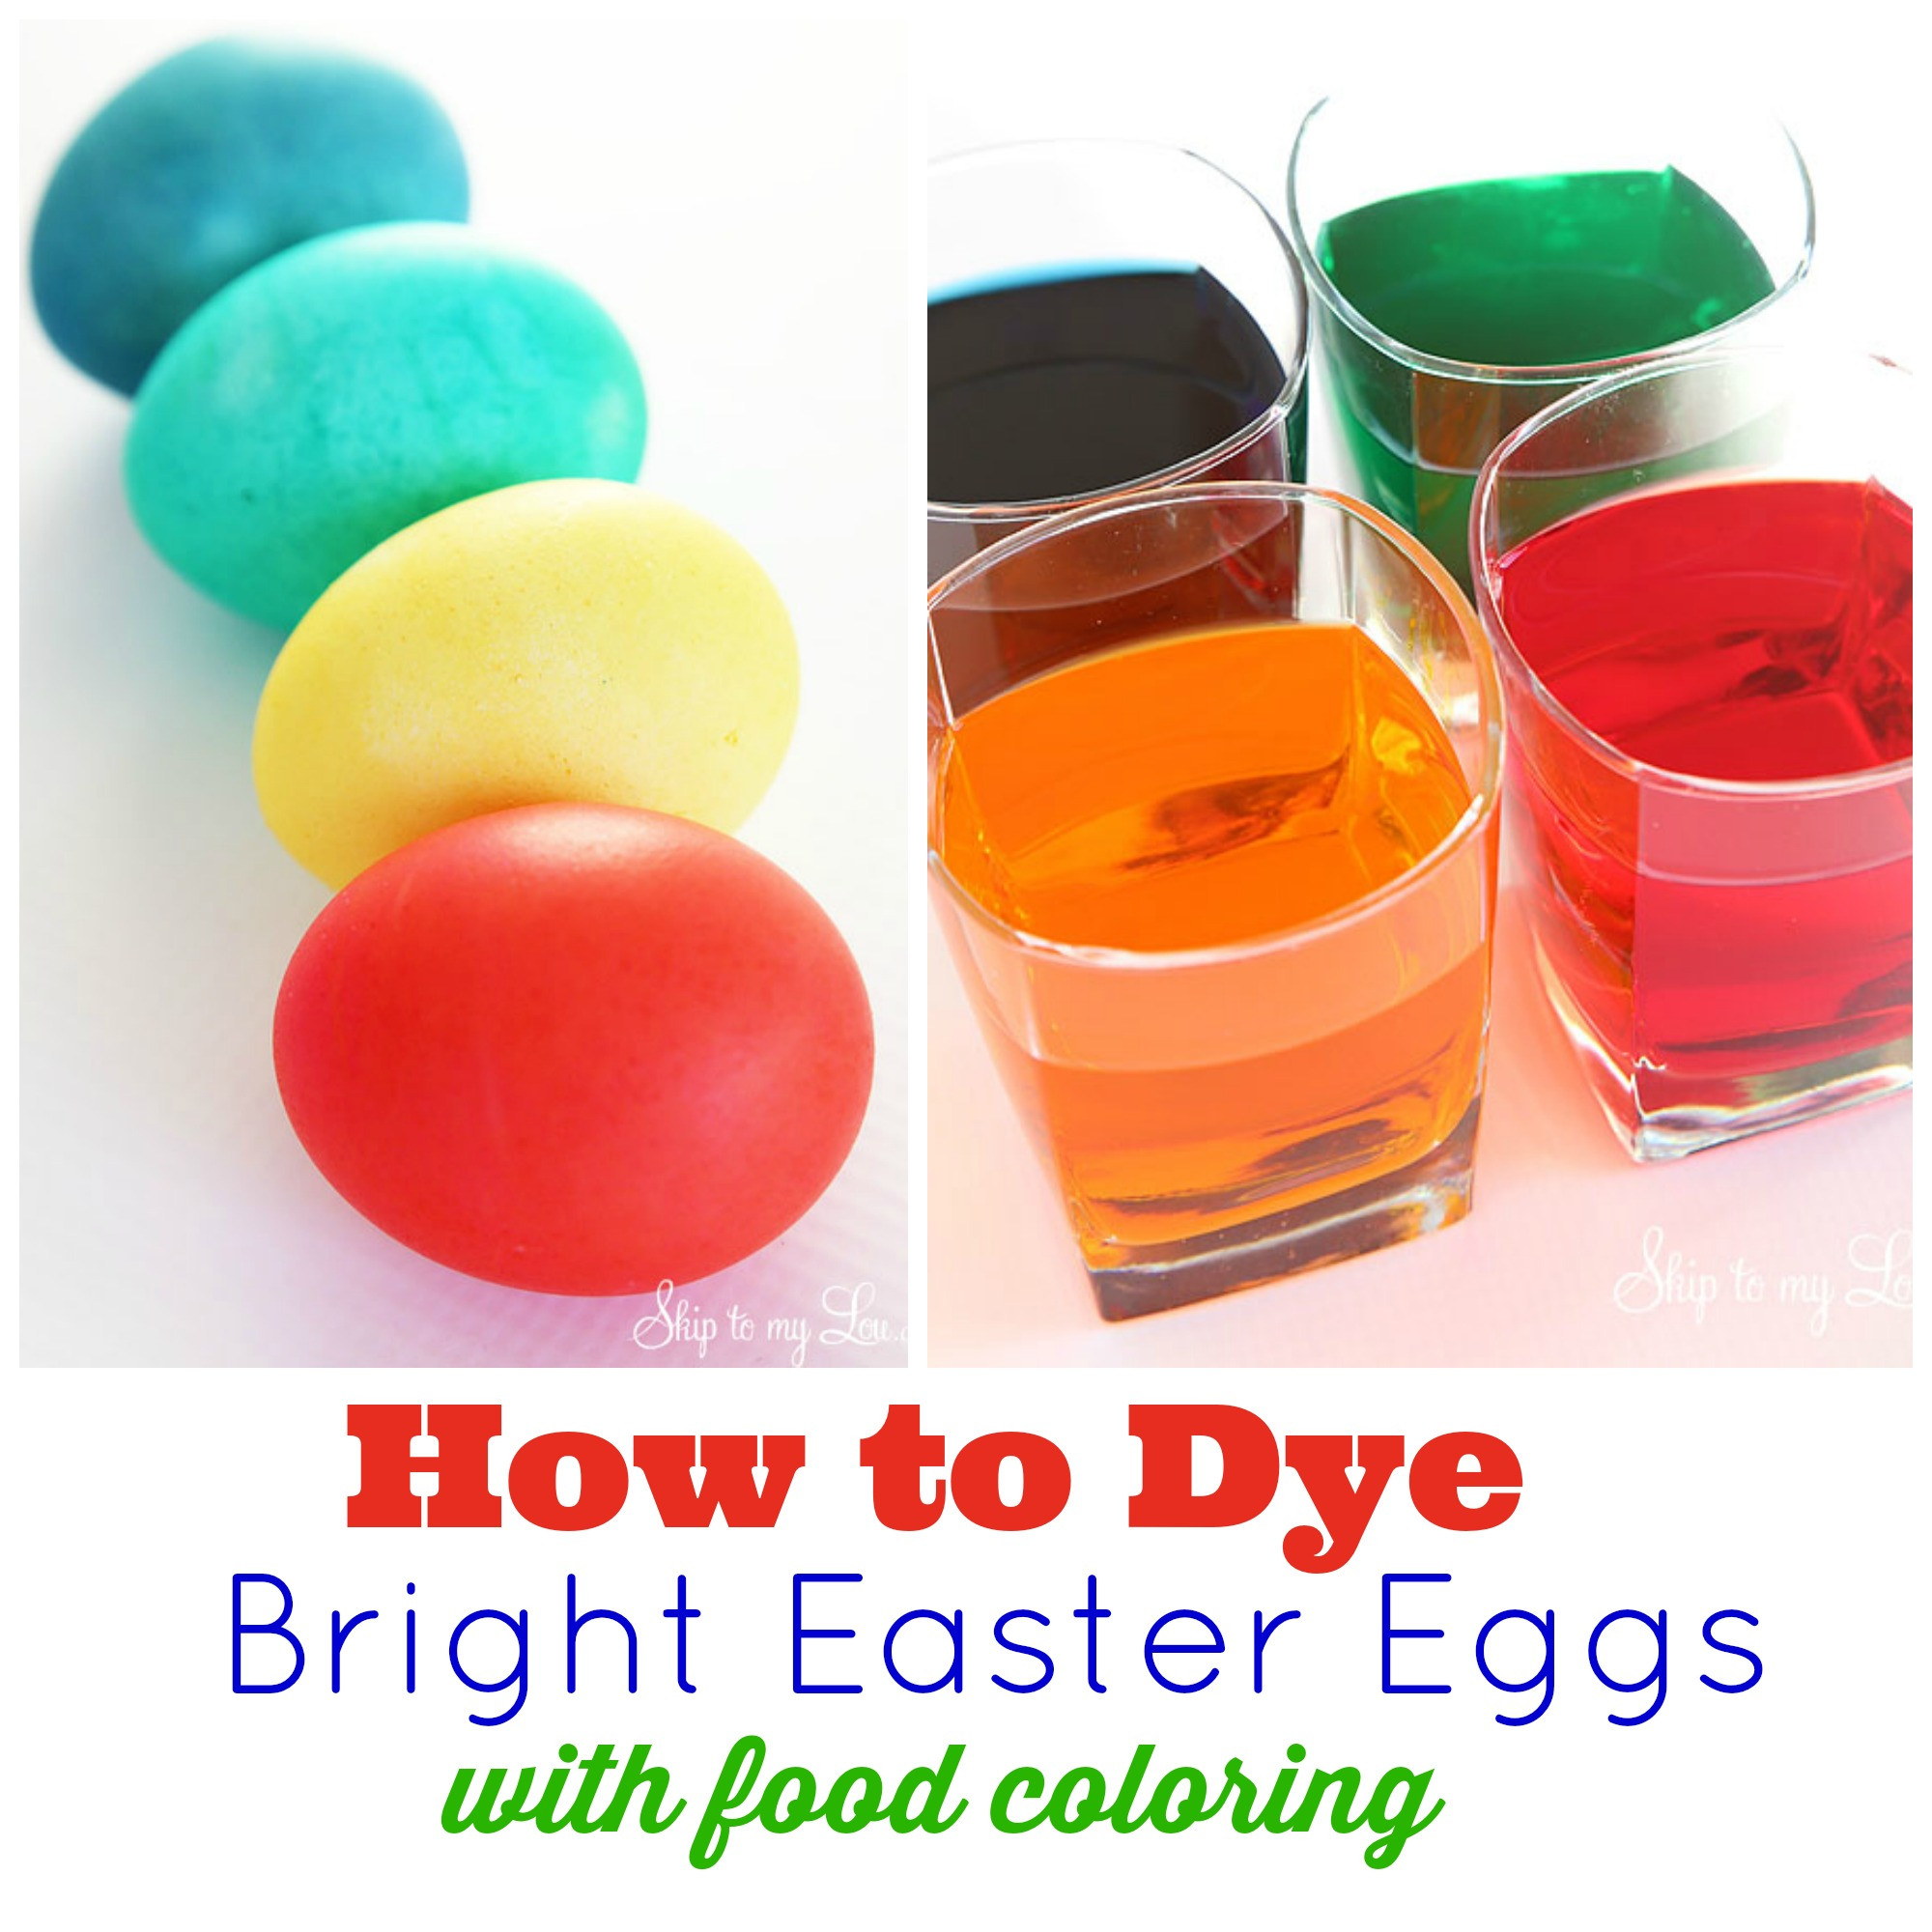 Easter Eggs with Food Coloring Beautiful Ultimate How to for Dying Easter Eggs with Food Coloring